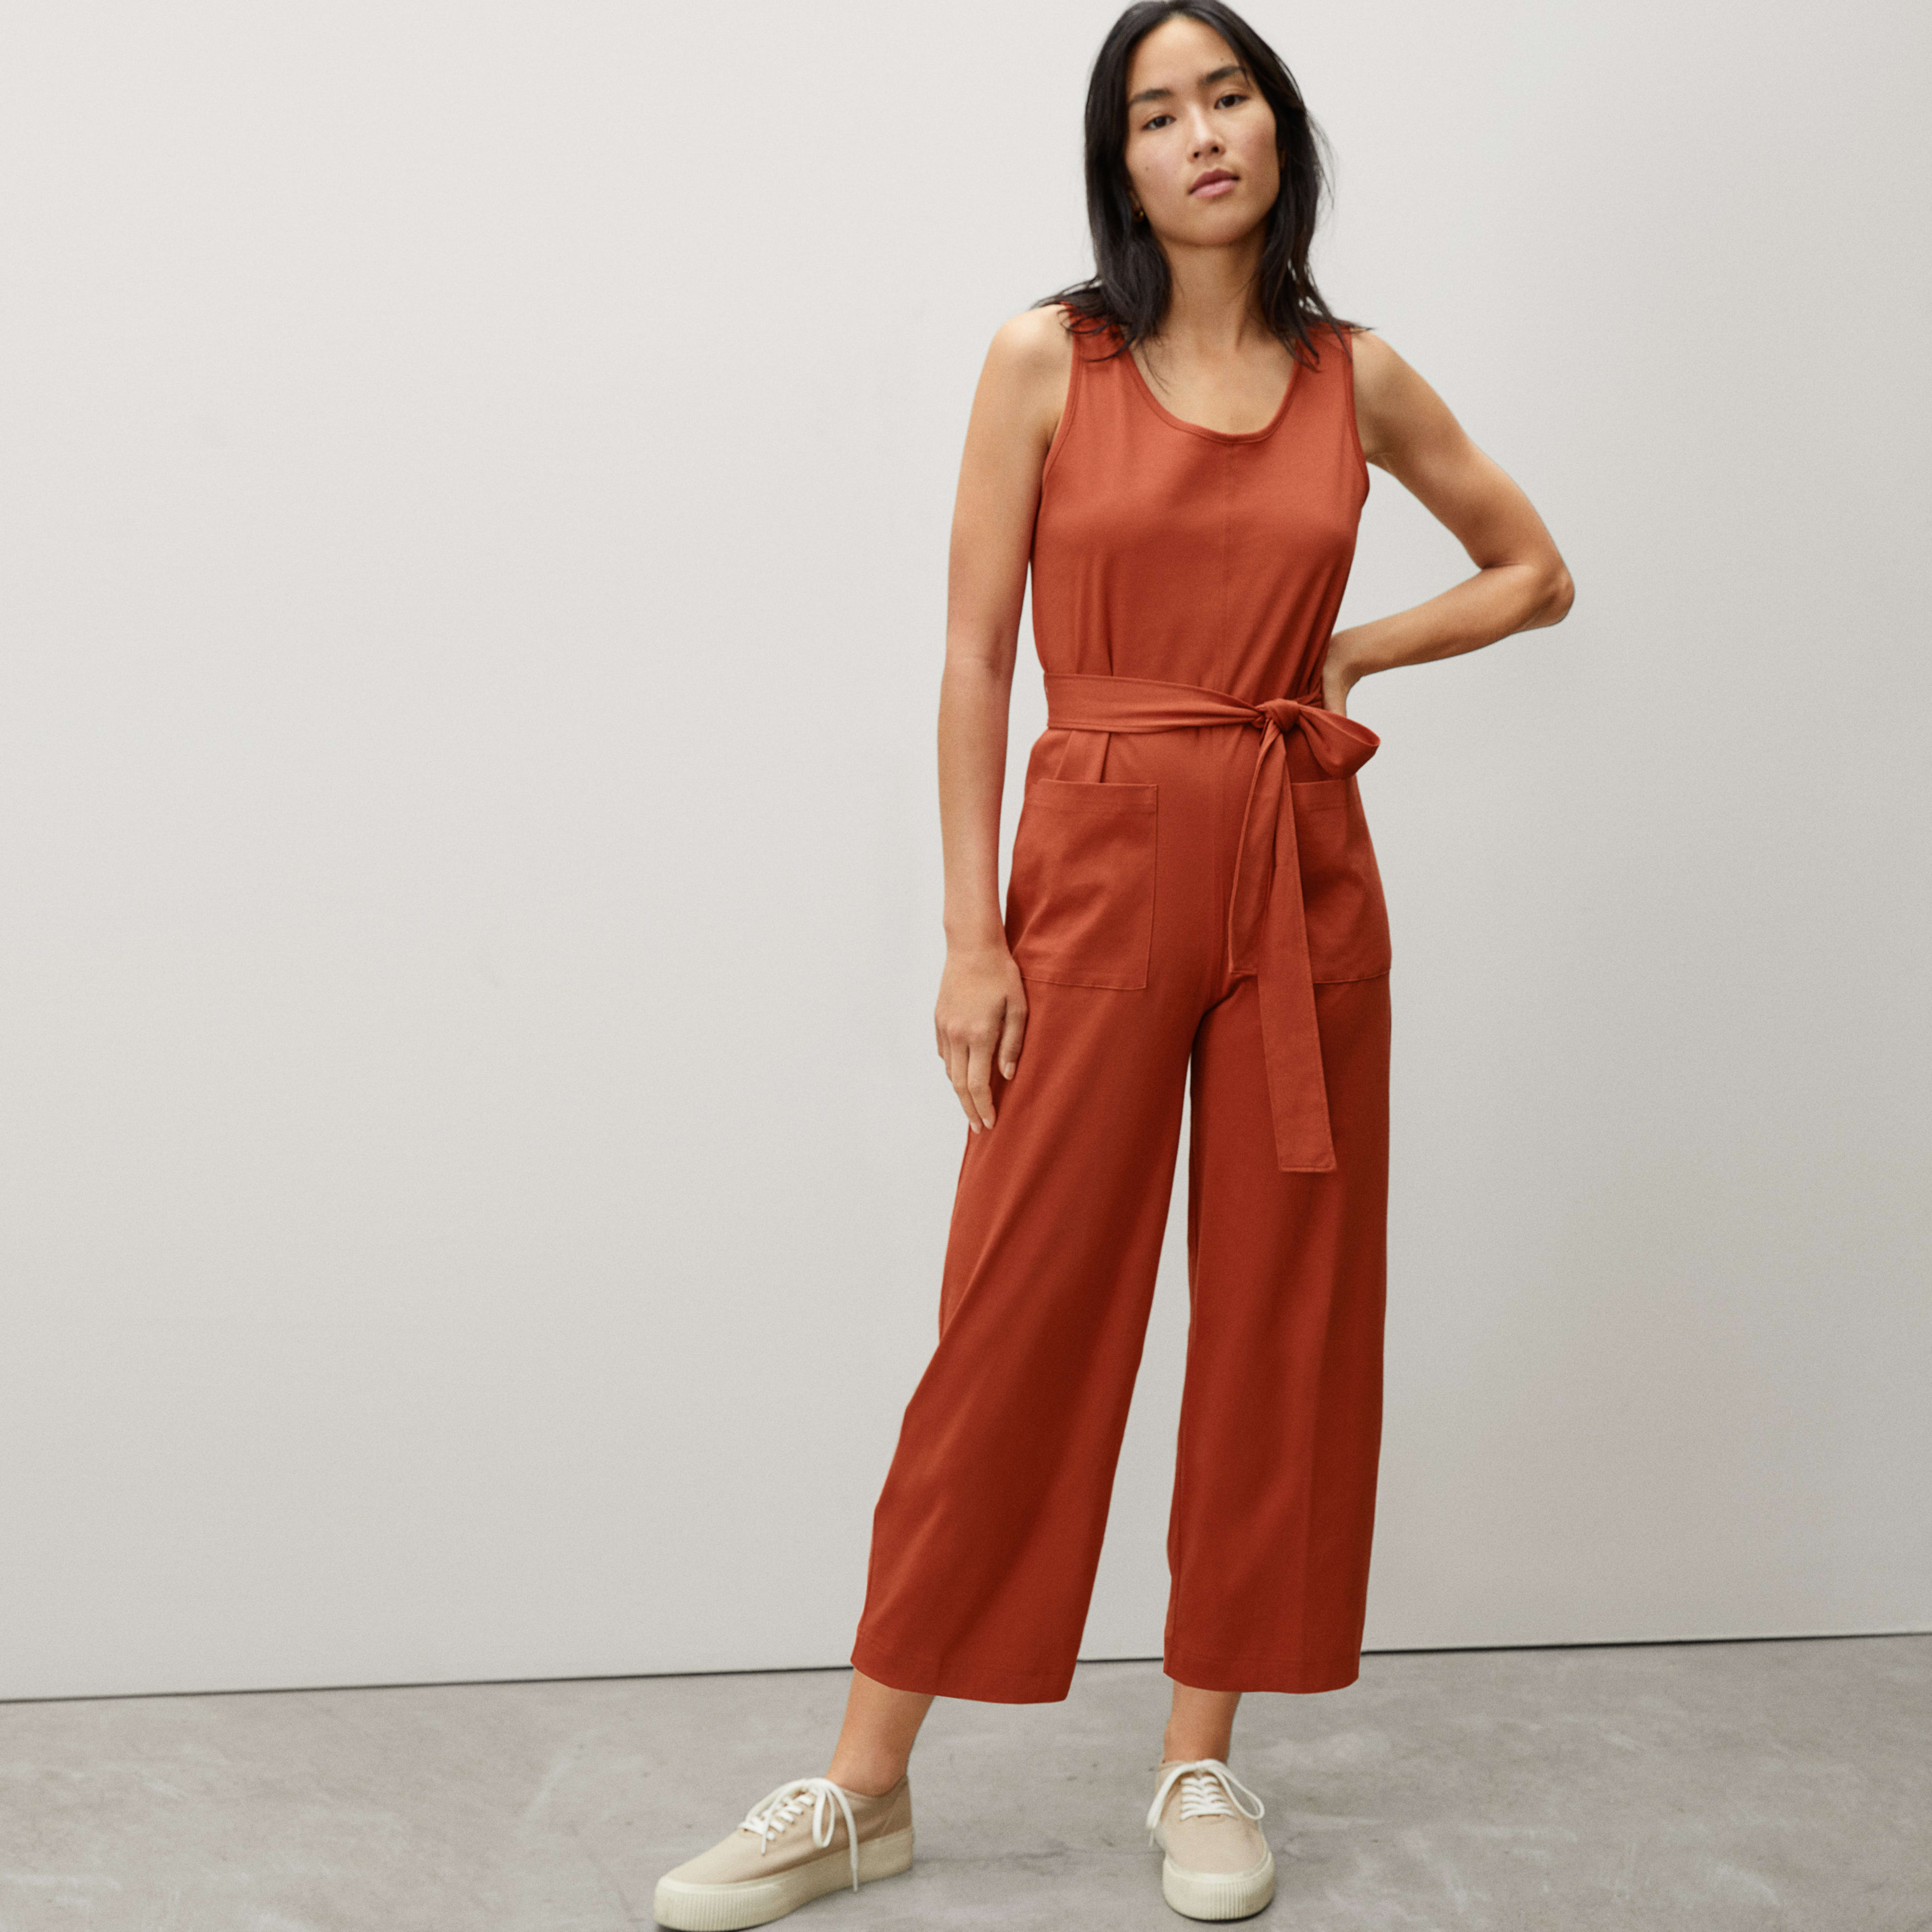 The Luxe Cotton Jumpsuit